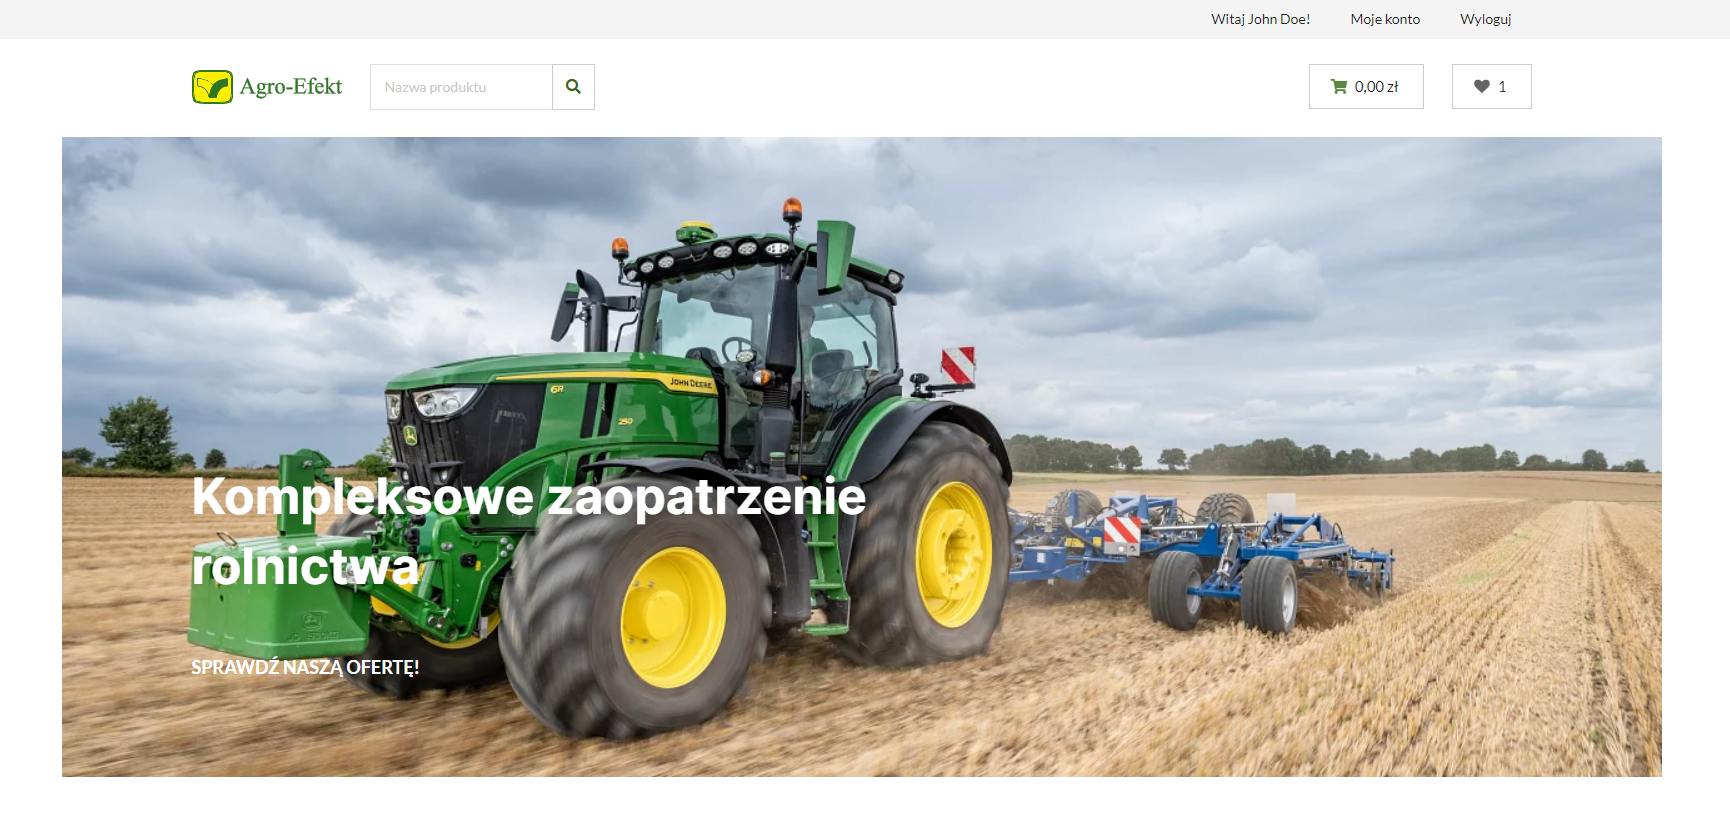 Sylius-based B2B store for an agricultural company